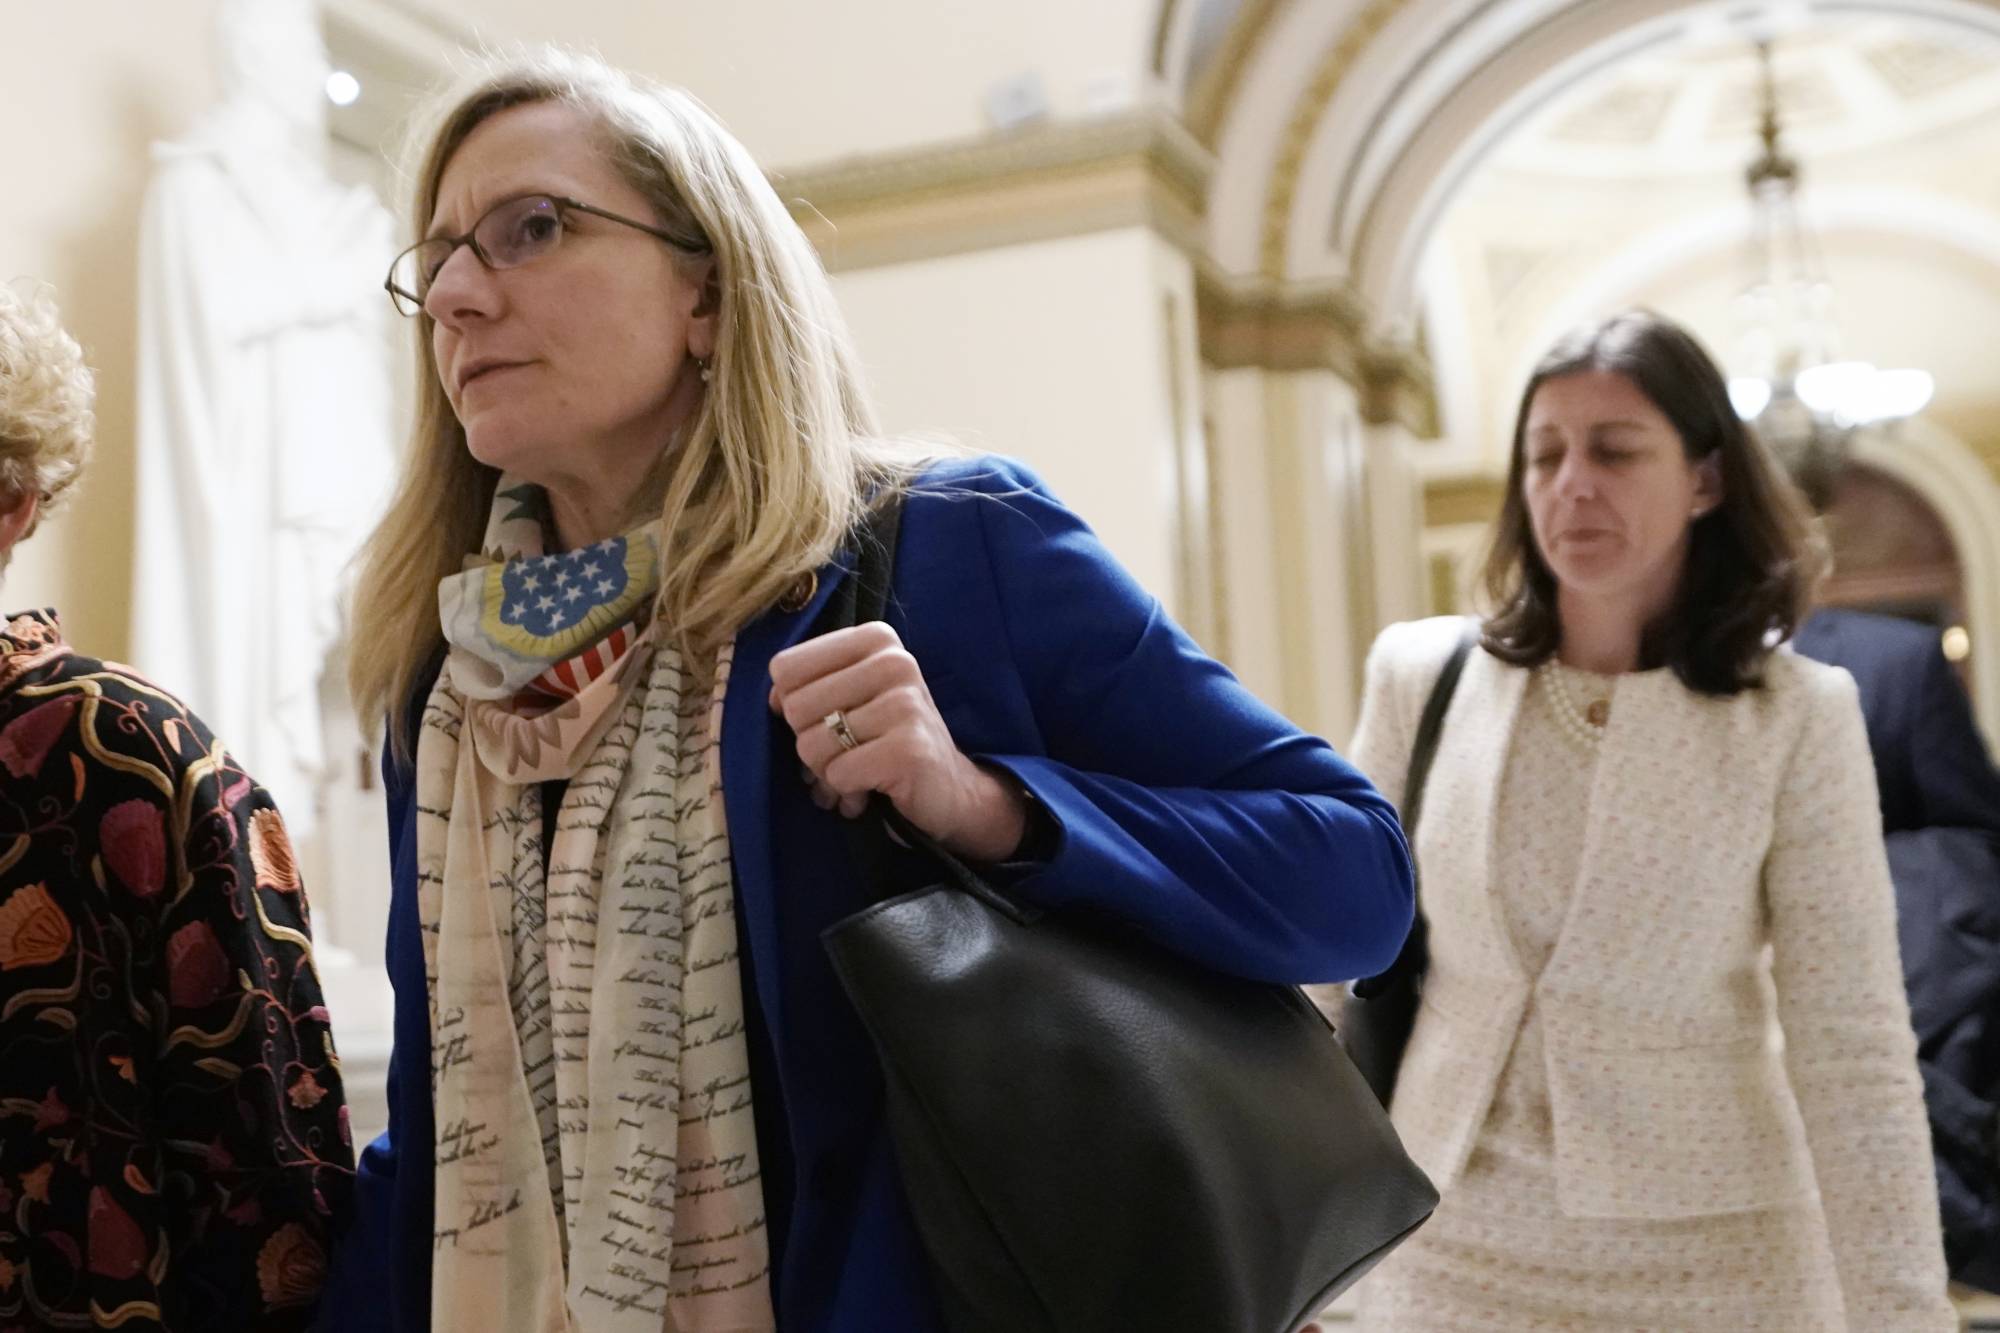 FILE - In this Dec. 18, 2019 file photo, Rep Abigail Spanberger D-Va., left, and Rep Elaine Luria. D-Va., walk at the Capitol in Washington. The U.S. Chamber of Commerce has decided to endorse 23 freshmen House Democrats in this fall’s elections. The move represents a gesture of bipartisanship by the nation's largest business organization, which has long leaned strongly toward Republicans. (AP Photo/J. Scott Applewhite)